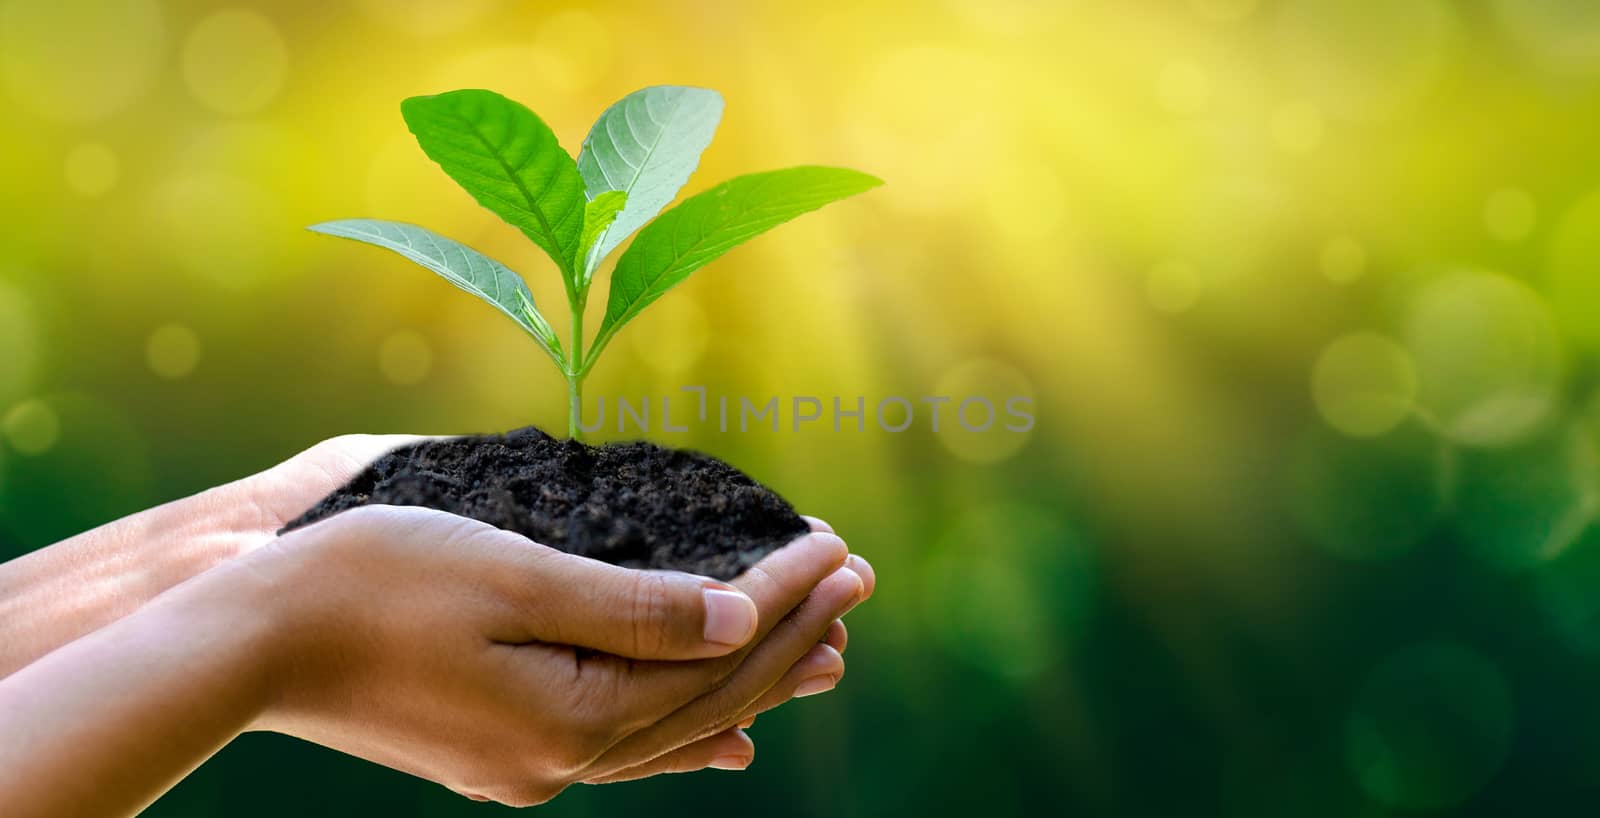 environment Earth Day In the hands of trees growing seedlings. Bokeh green Background Female hand holding tree on nature field grass Forest conservation concept by sarayut_thaneerat